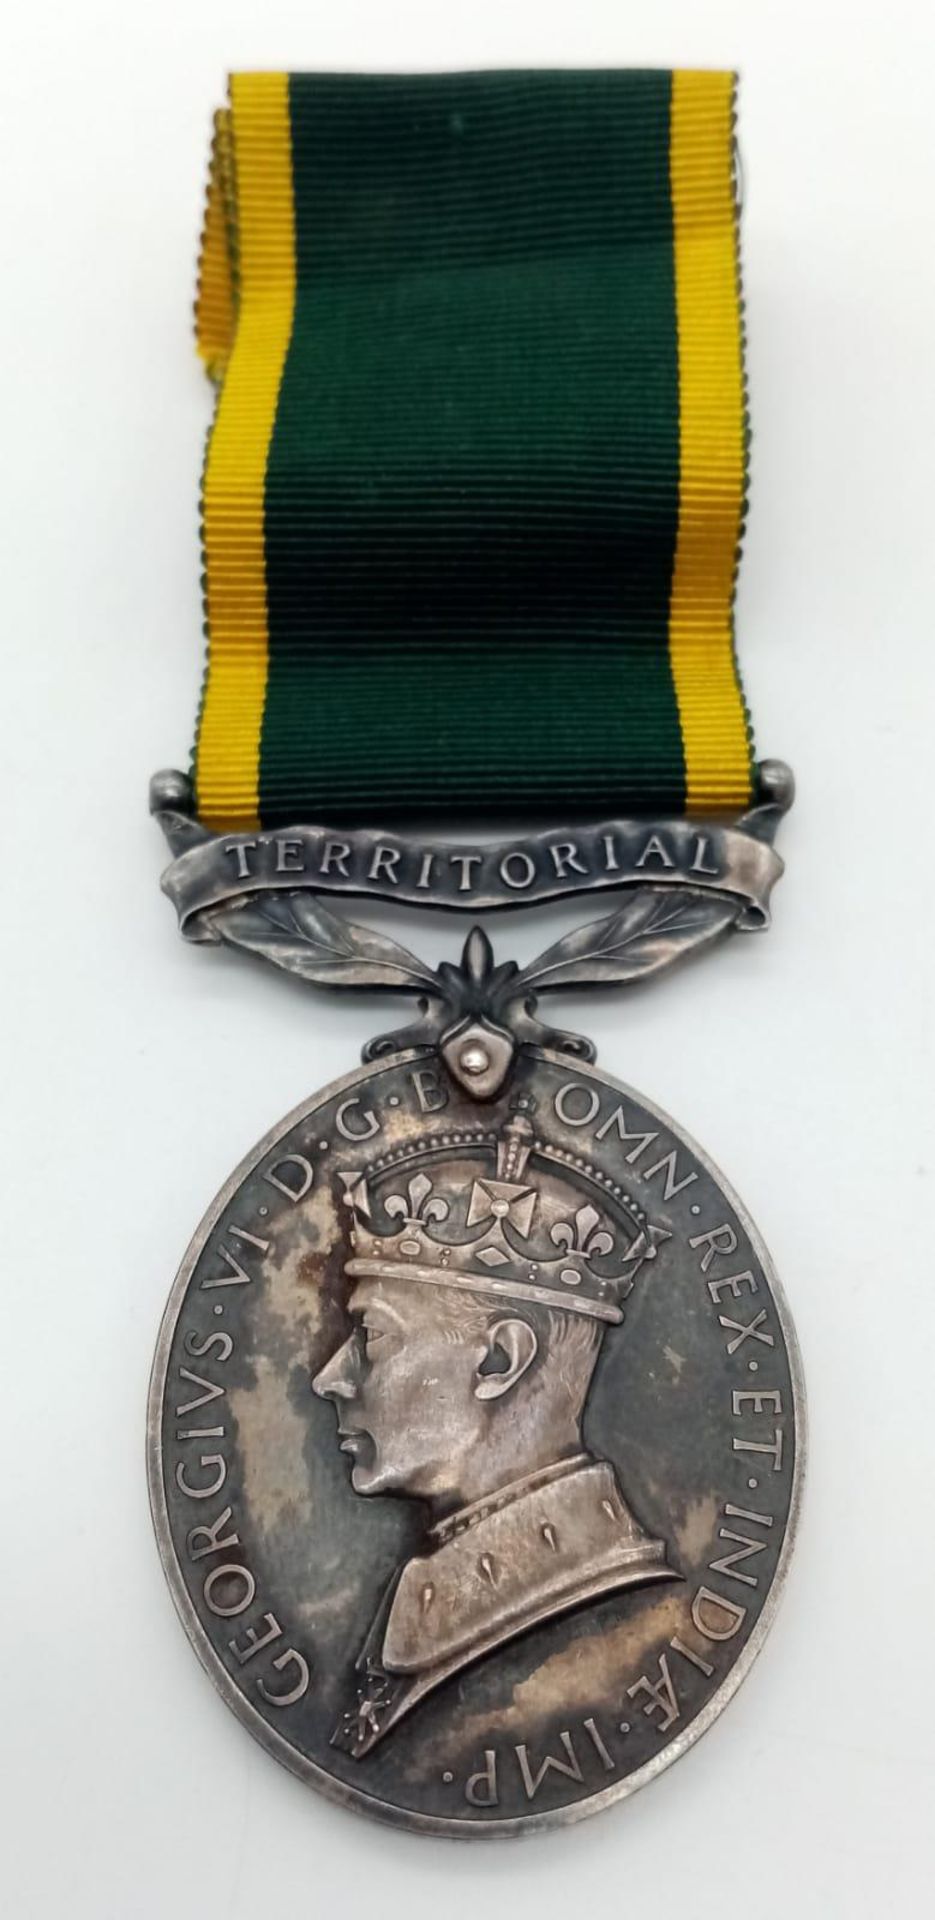 King George VI Territorial Efficiency Medal. Awarded to: 896698 Pte W.G Smith R.P.C (Royal Pioneer